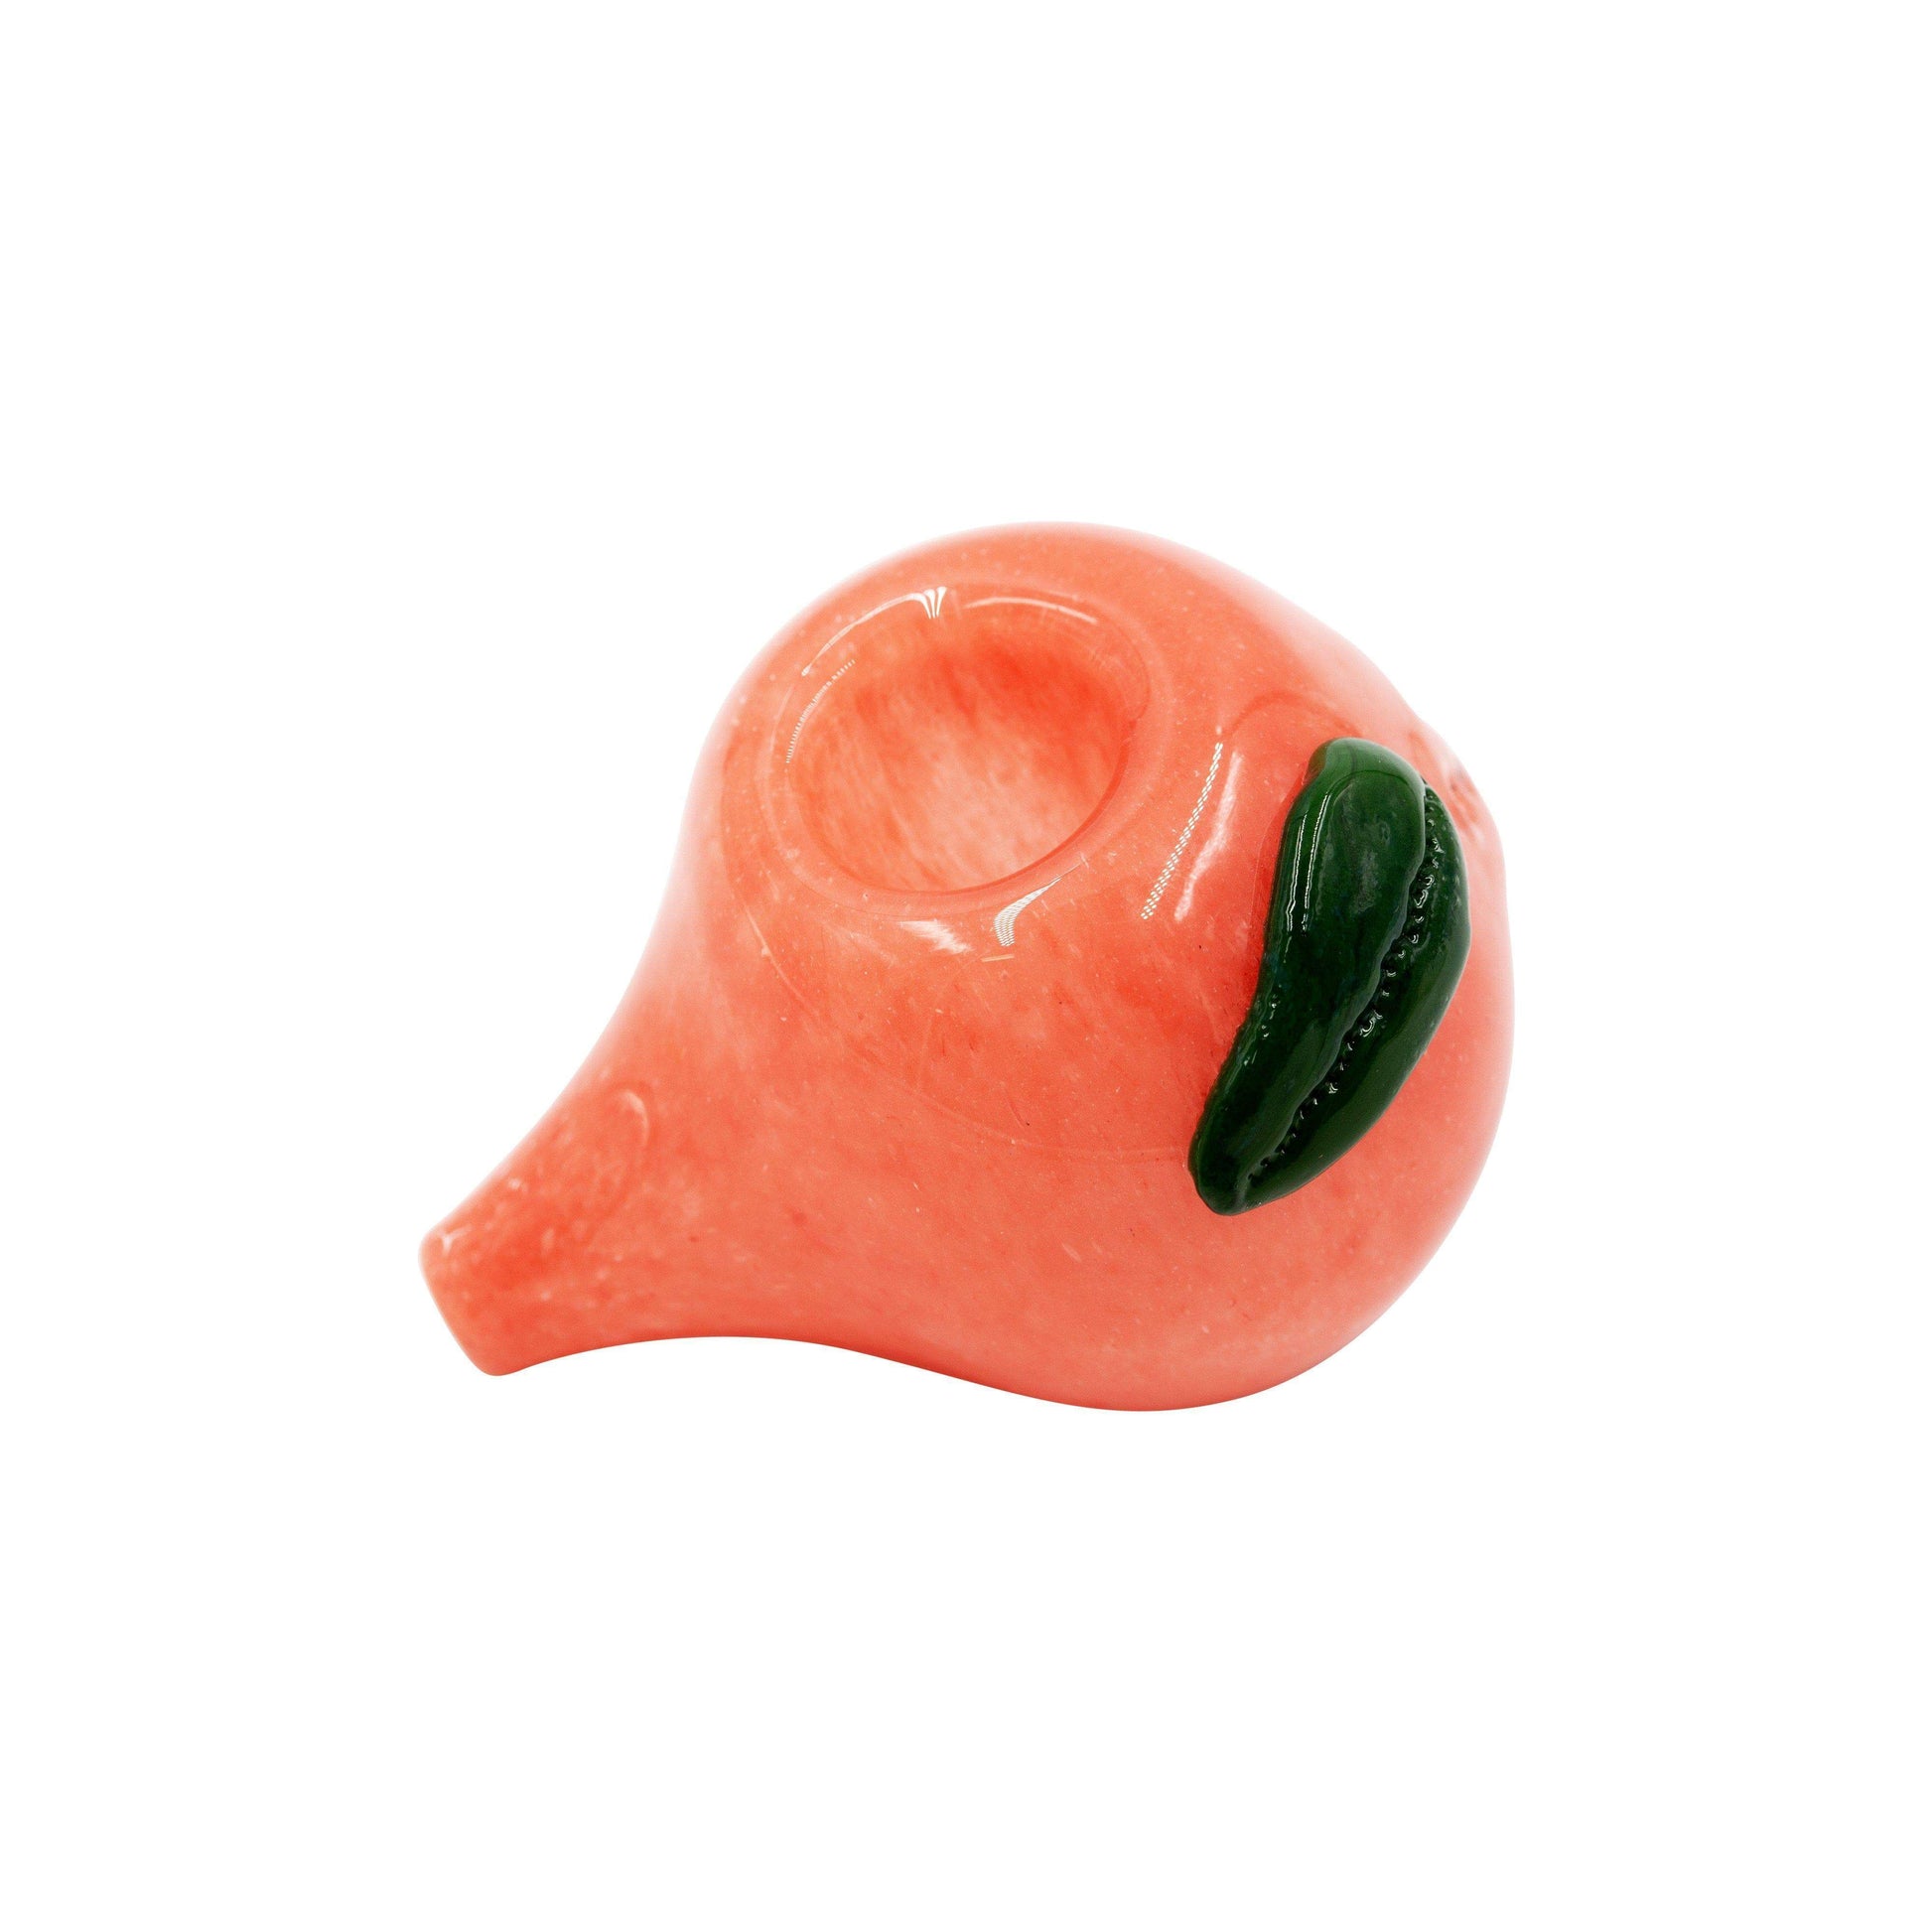 Cute discreet 3-inch short stem mini glass pipe smoking device with a peach fruit with 1 leaf design and shape